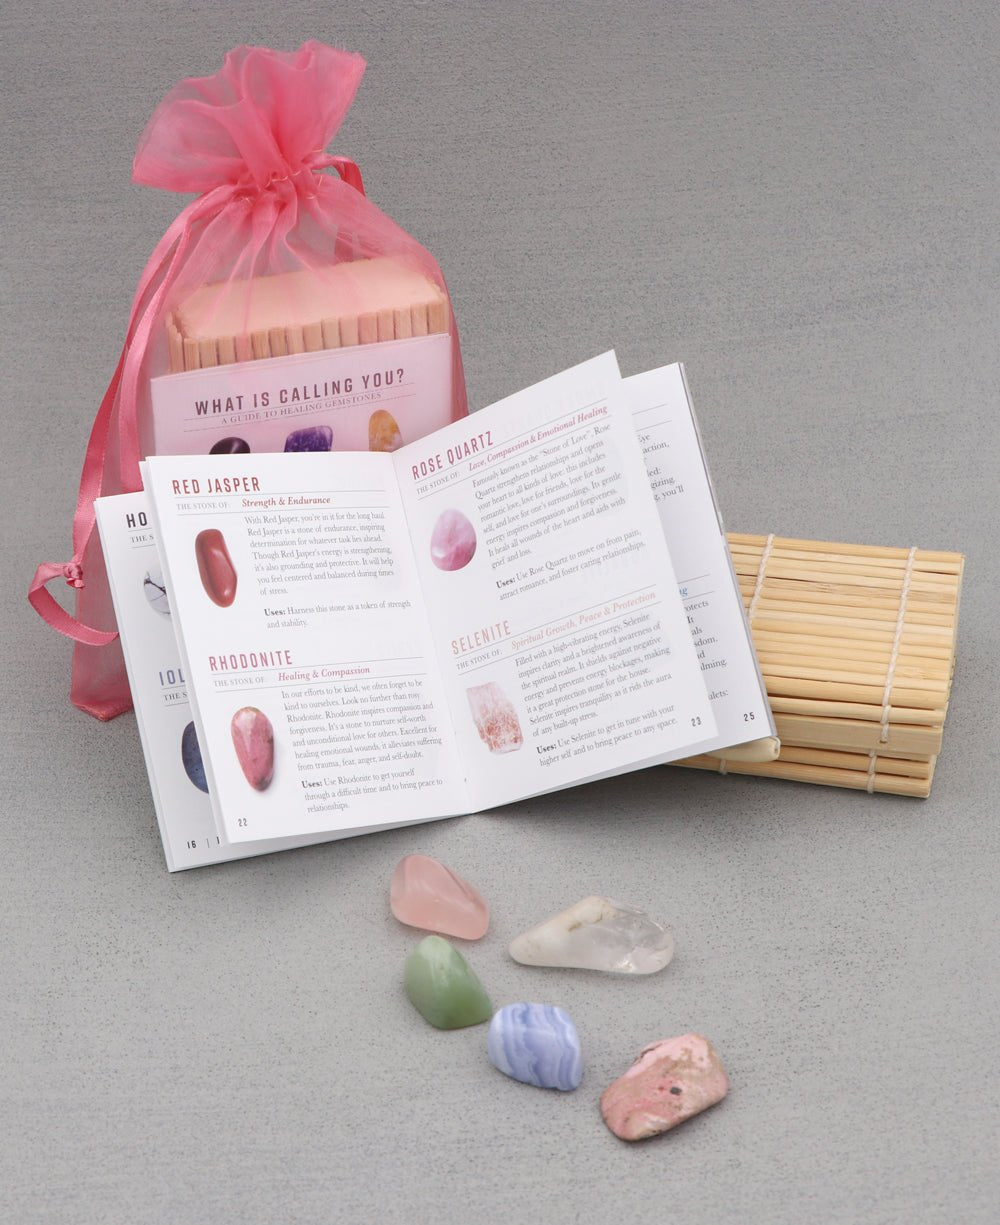 Healing Gemstone Set for Love and Relationships -